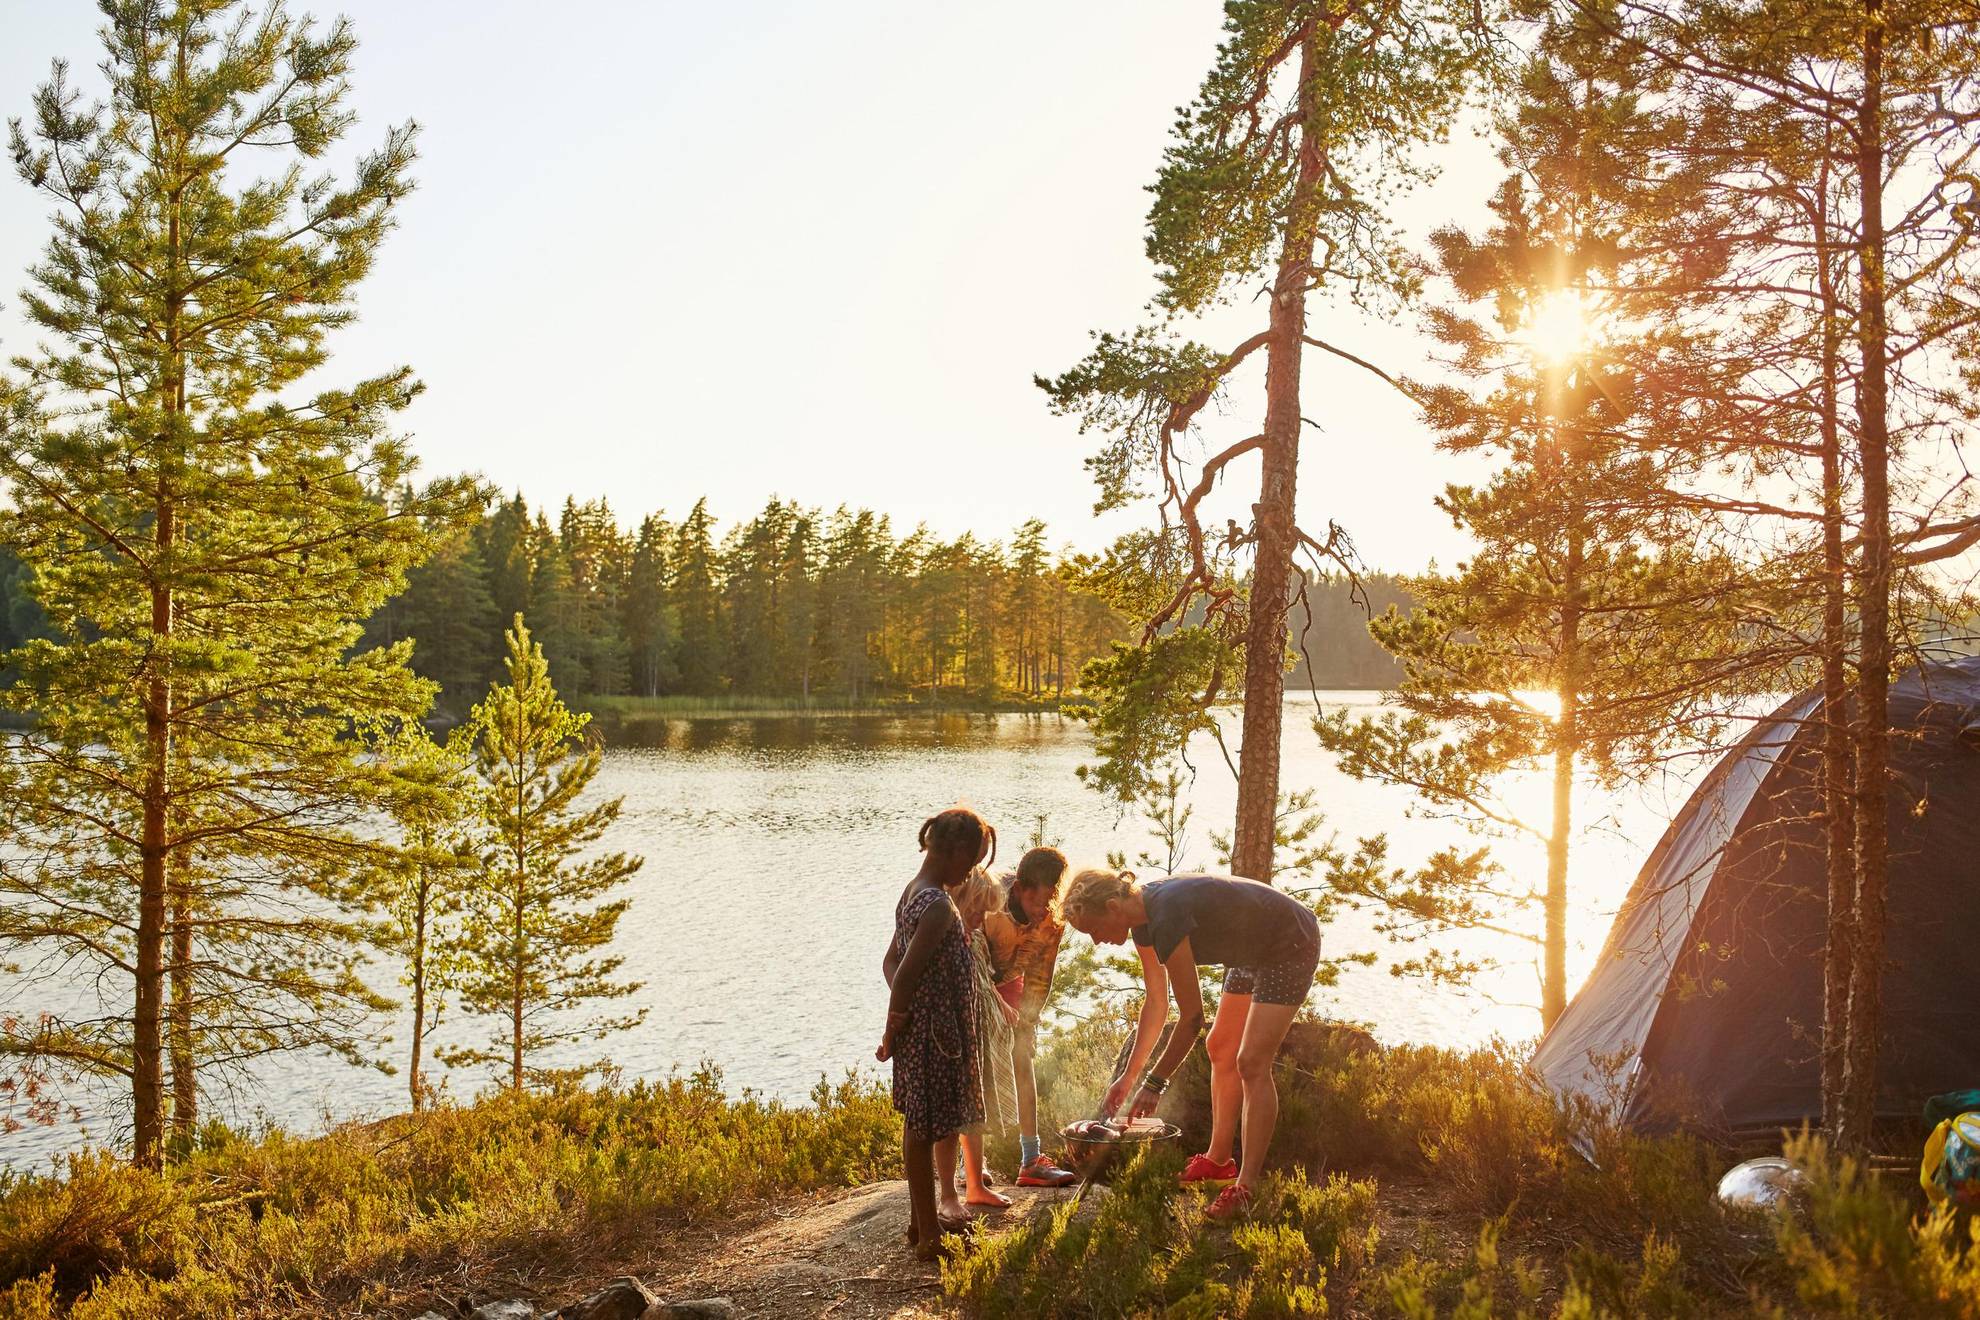 : People in Sweden barbecuing by their tent, next to a lake in the forest.